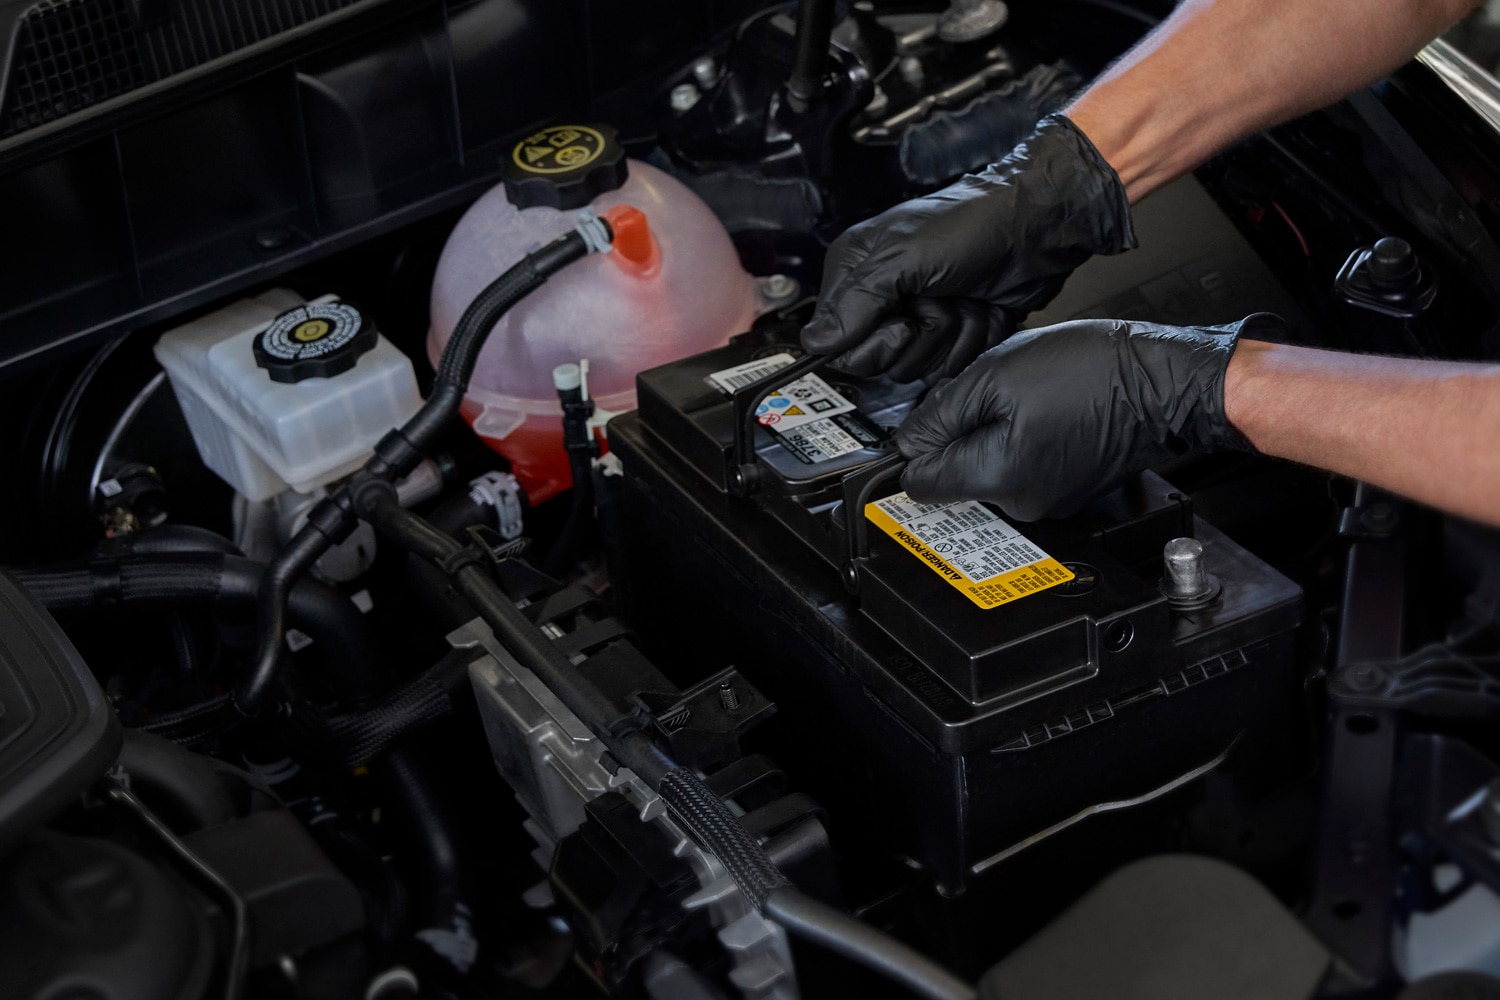 A battery is being placed into a car's engine compartment